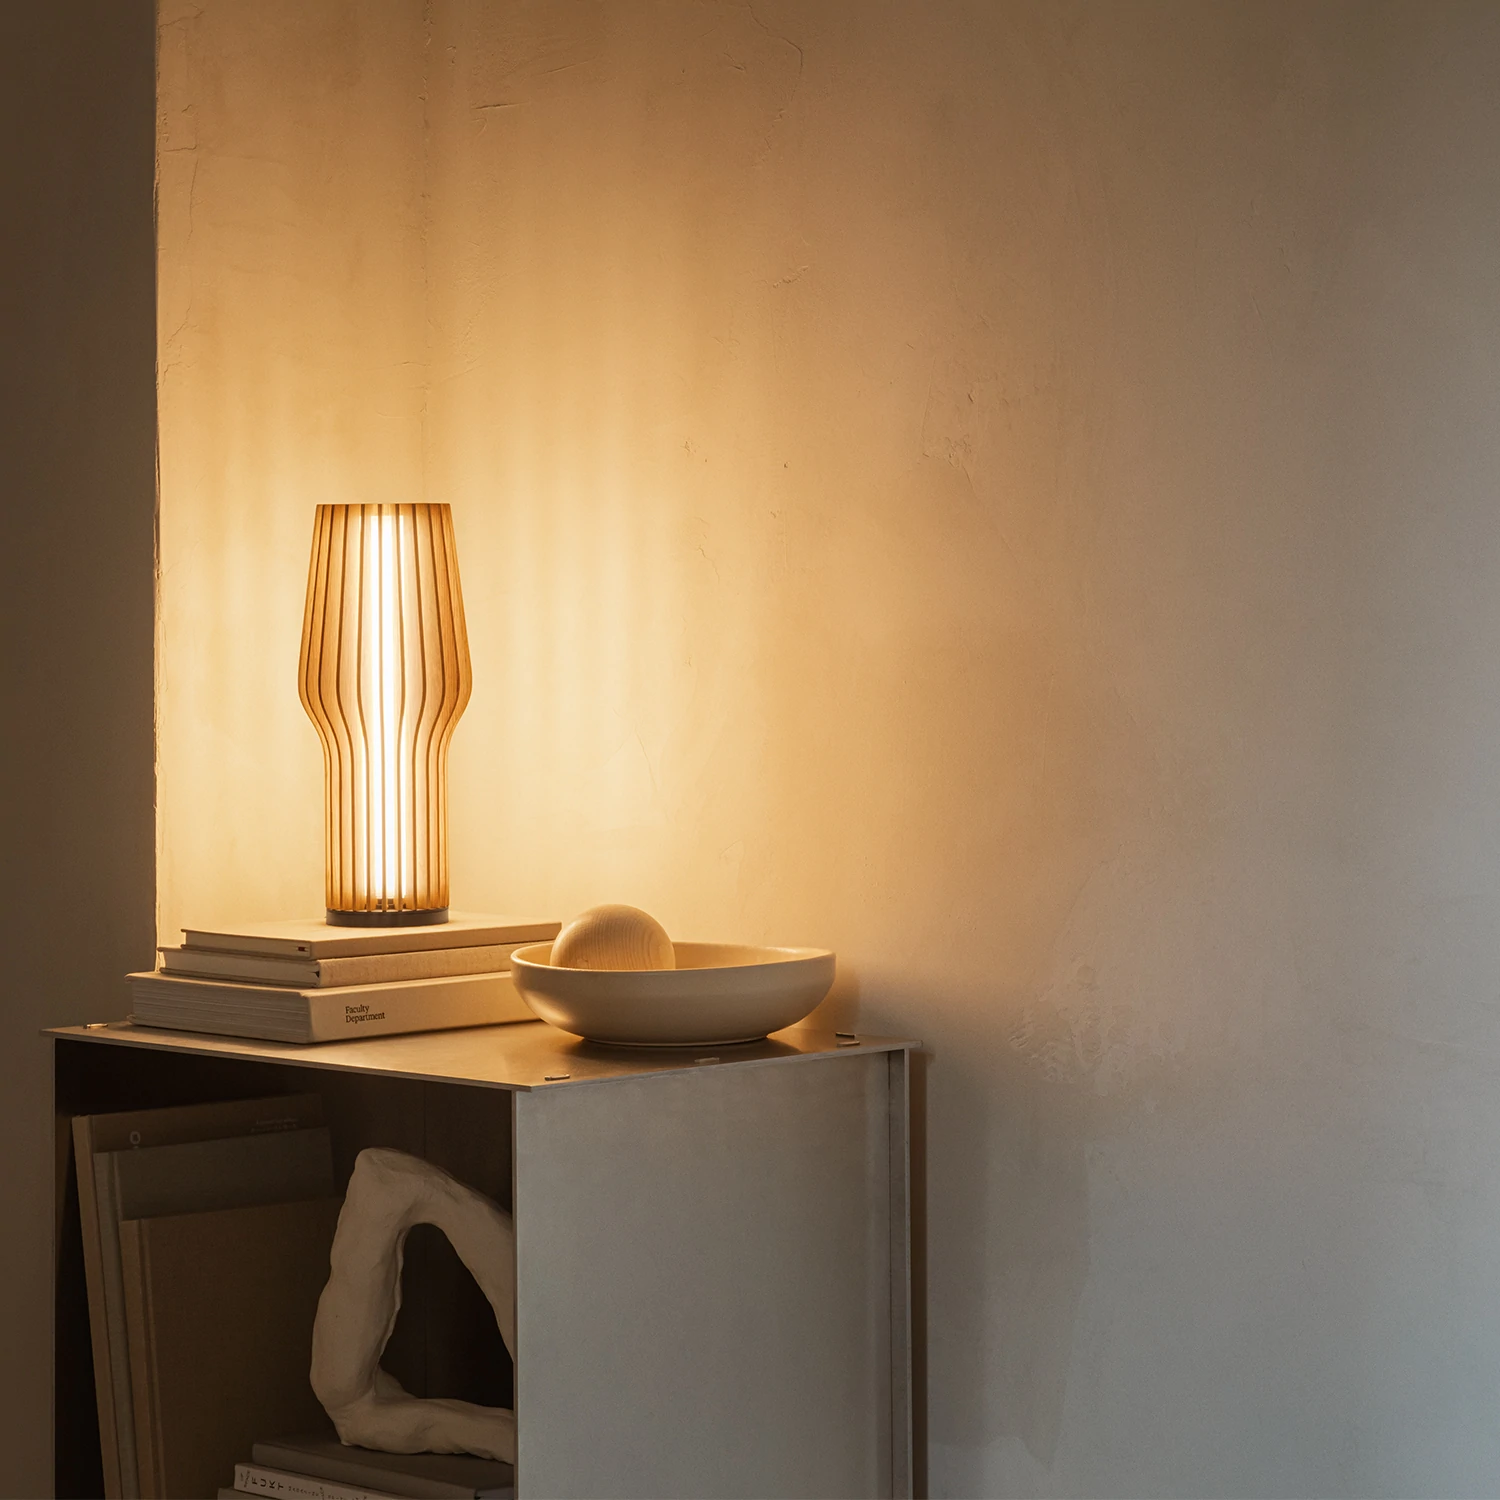 Buy Eva Solo Radiant Table Lamp in Oak Table Lamps The Eva Solo Radiant Table Lamp in Oak is the perfect way to infuse "hygge" into your home. Cordless and with a touch-sensitive switch, it can easily be placed on your bookshelf or patio to create an invi